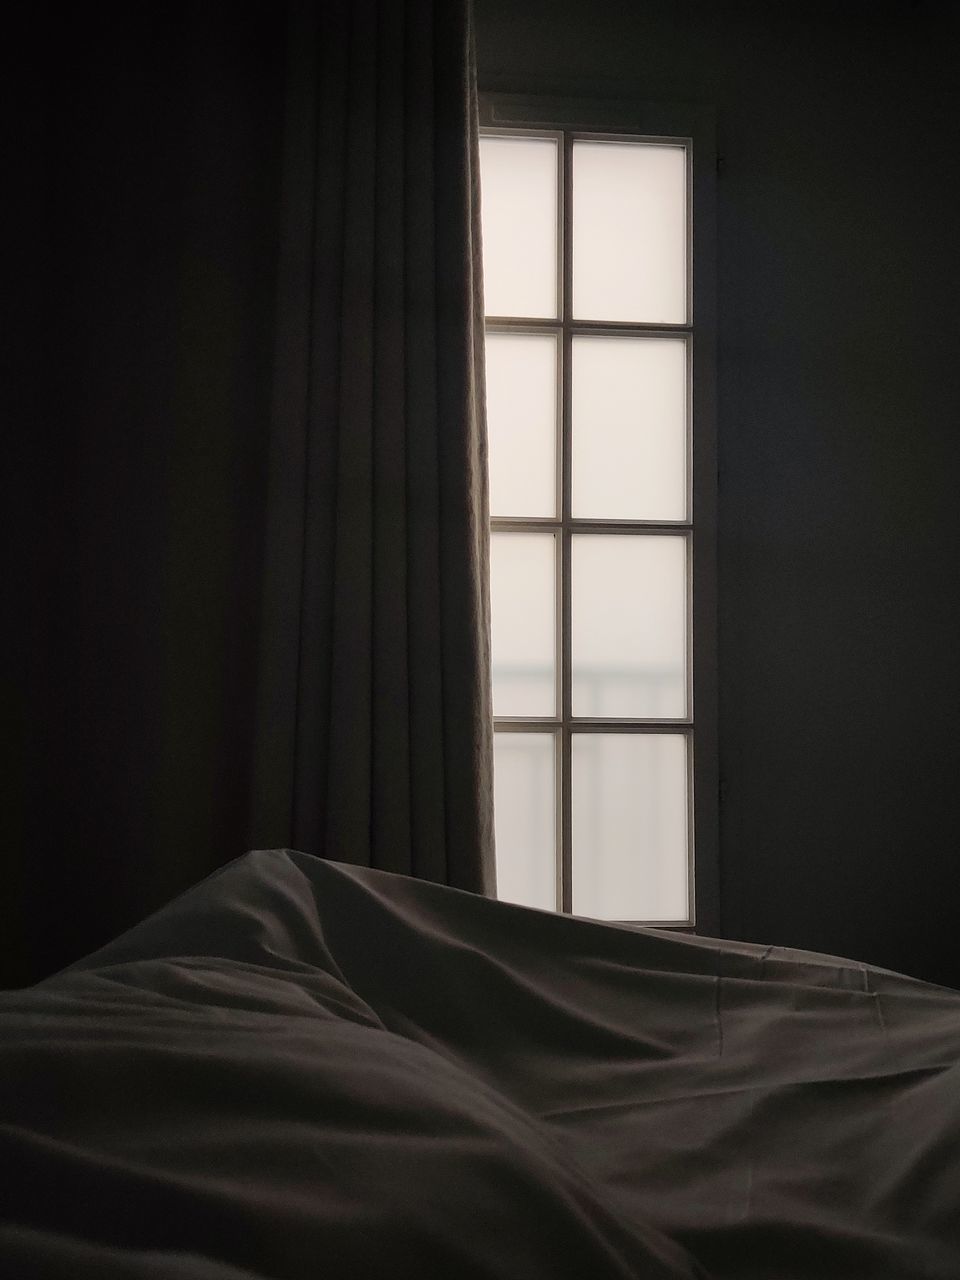 indoors, bed, window, bedroom, domestic room, furniture, textile, interior design, black, linen, sheet, no people, home interior, curtain, light, absence, dark, white, copy space, day, darkness, simplicity, blanket